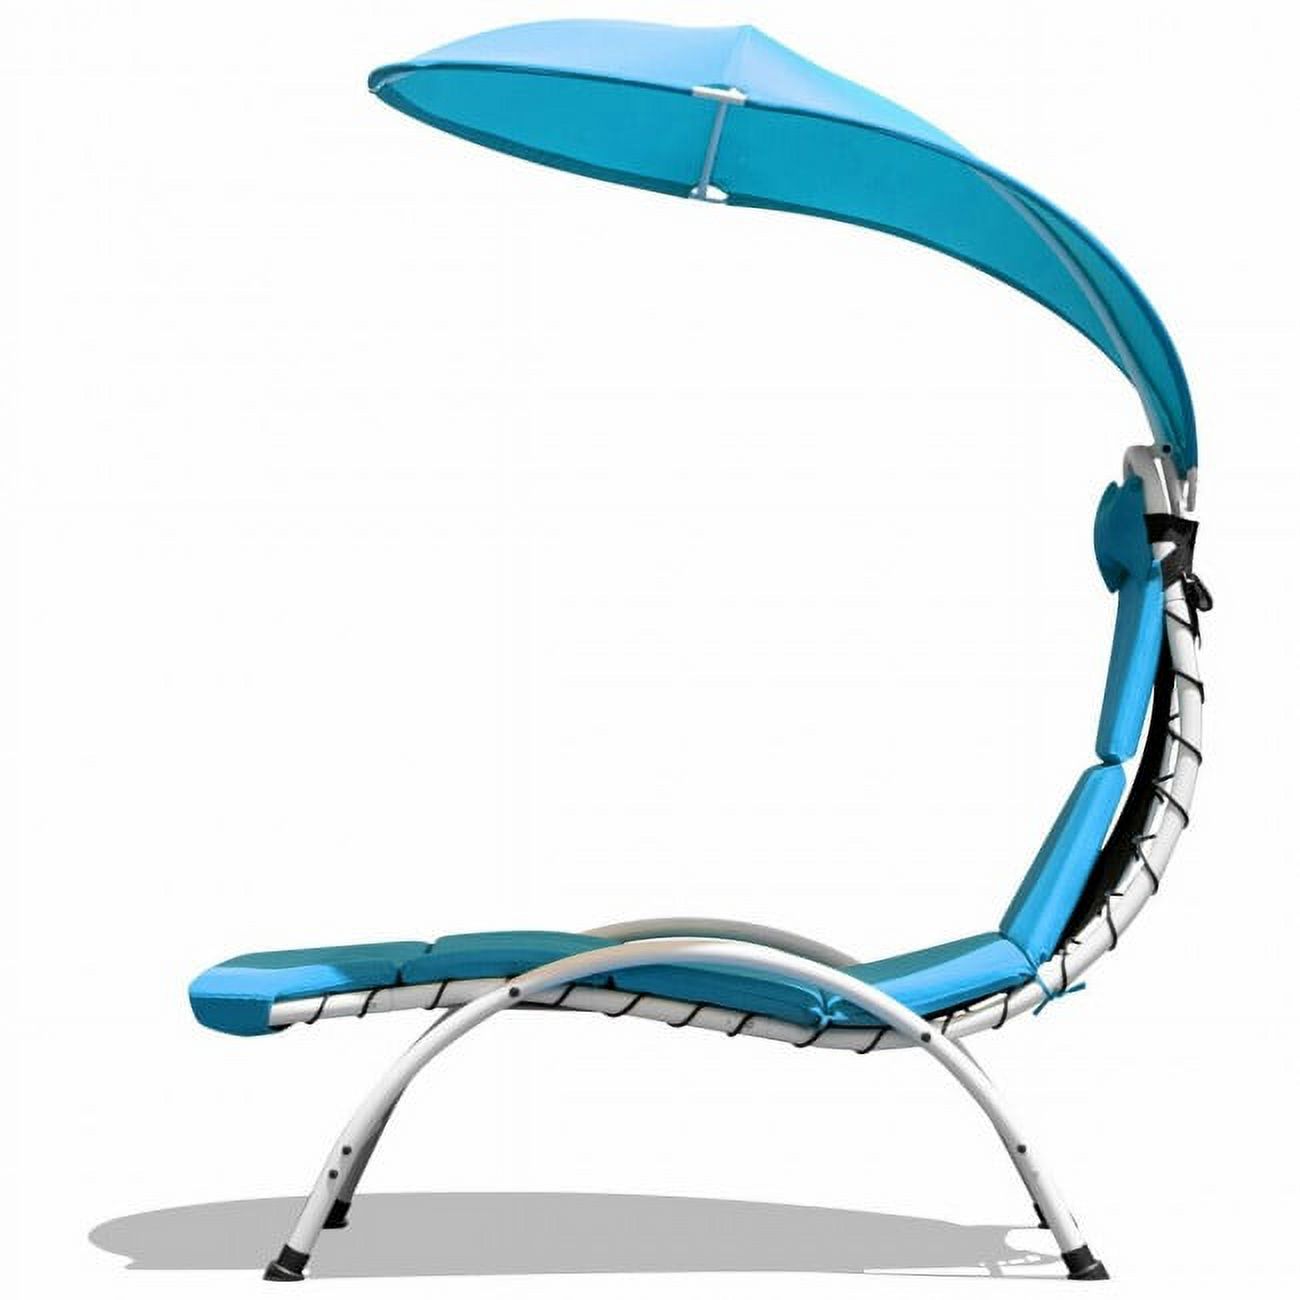 Patio Hanging Swing Hammock Chaise Lounger Chair with Canopy-Blue - image 5 of 7